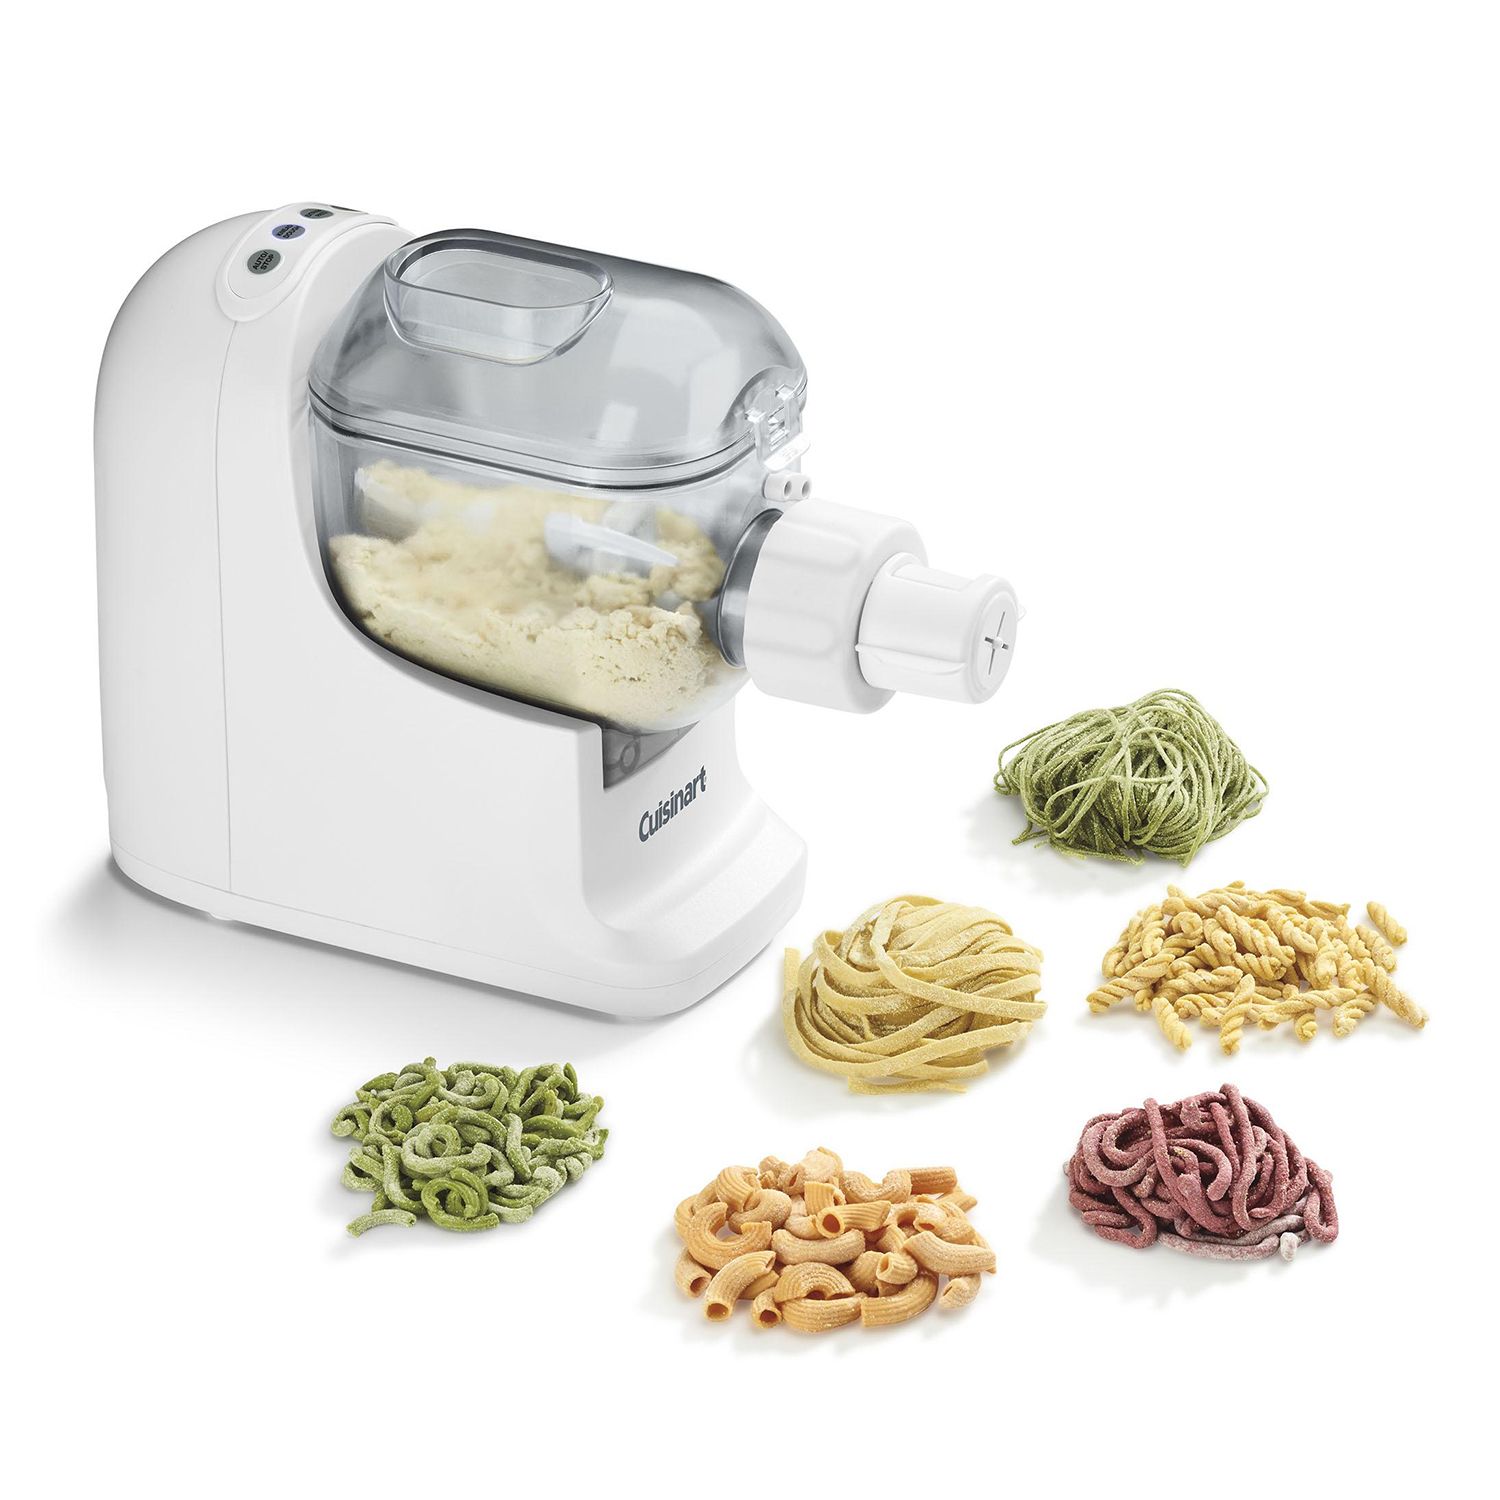 GEKER Electric Pasta Maker Machine, Automatic Pasta and Noodle Maker- 6  Noodle Shapes to Choose- Home Pasta Maker for Spaghetti,Fettuccine,Macaroni,  Dishwasher Safe Parts - Coupon Codes, Promo Codes, Daily Deals, Save Money